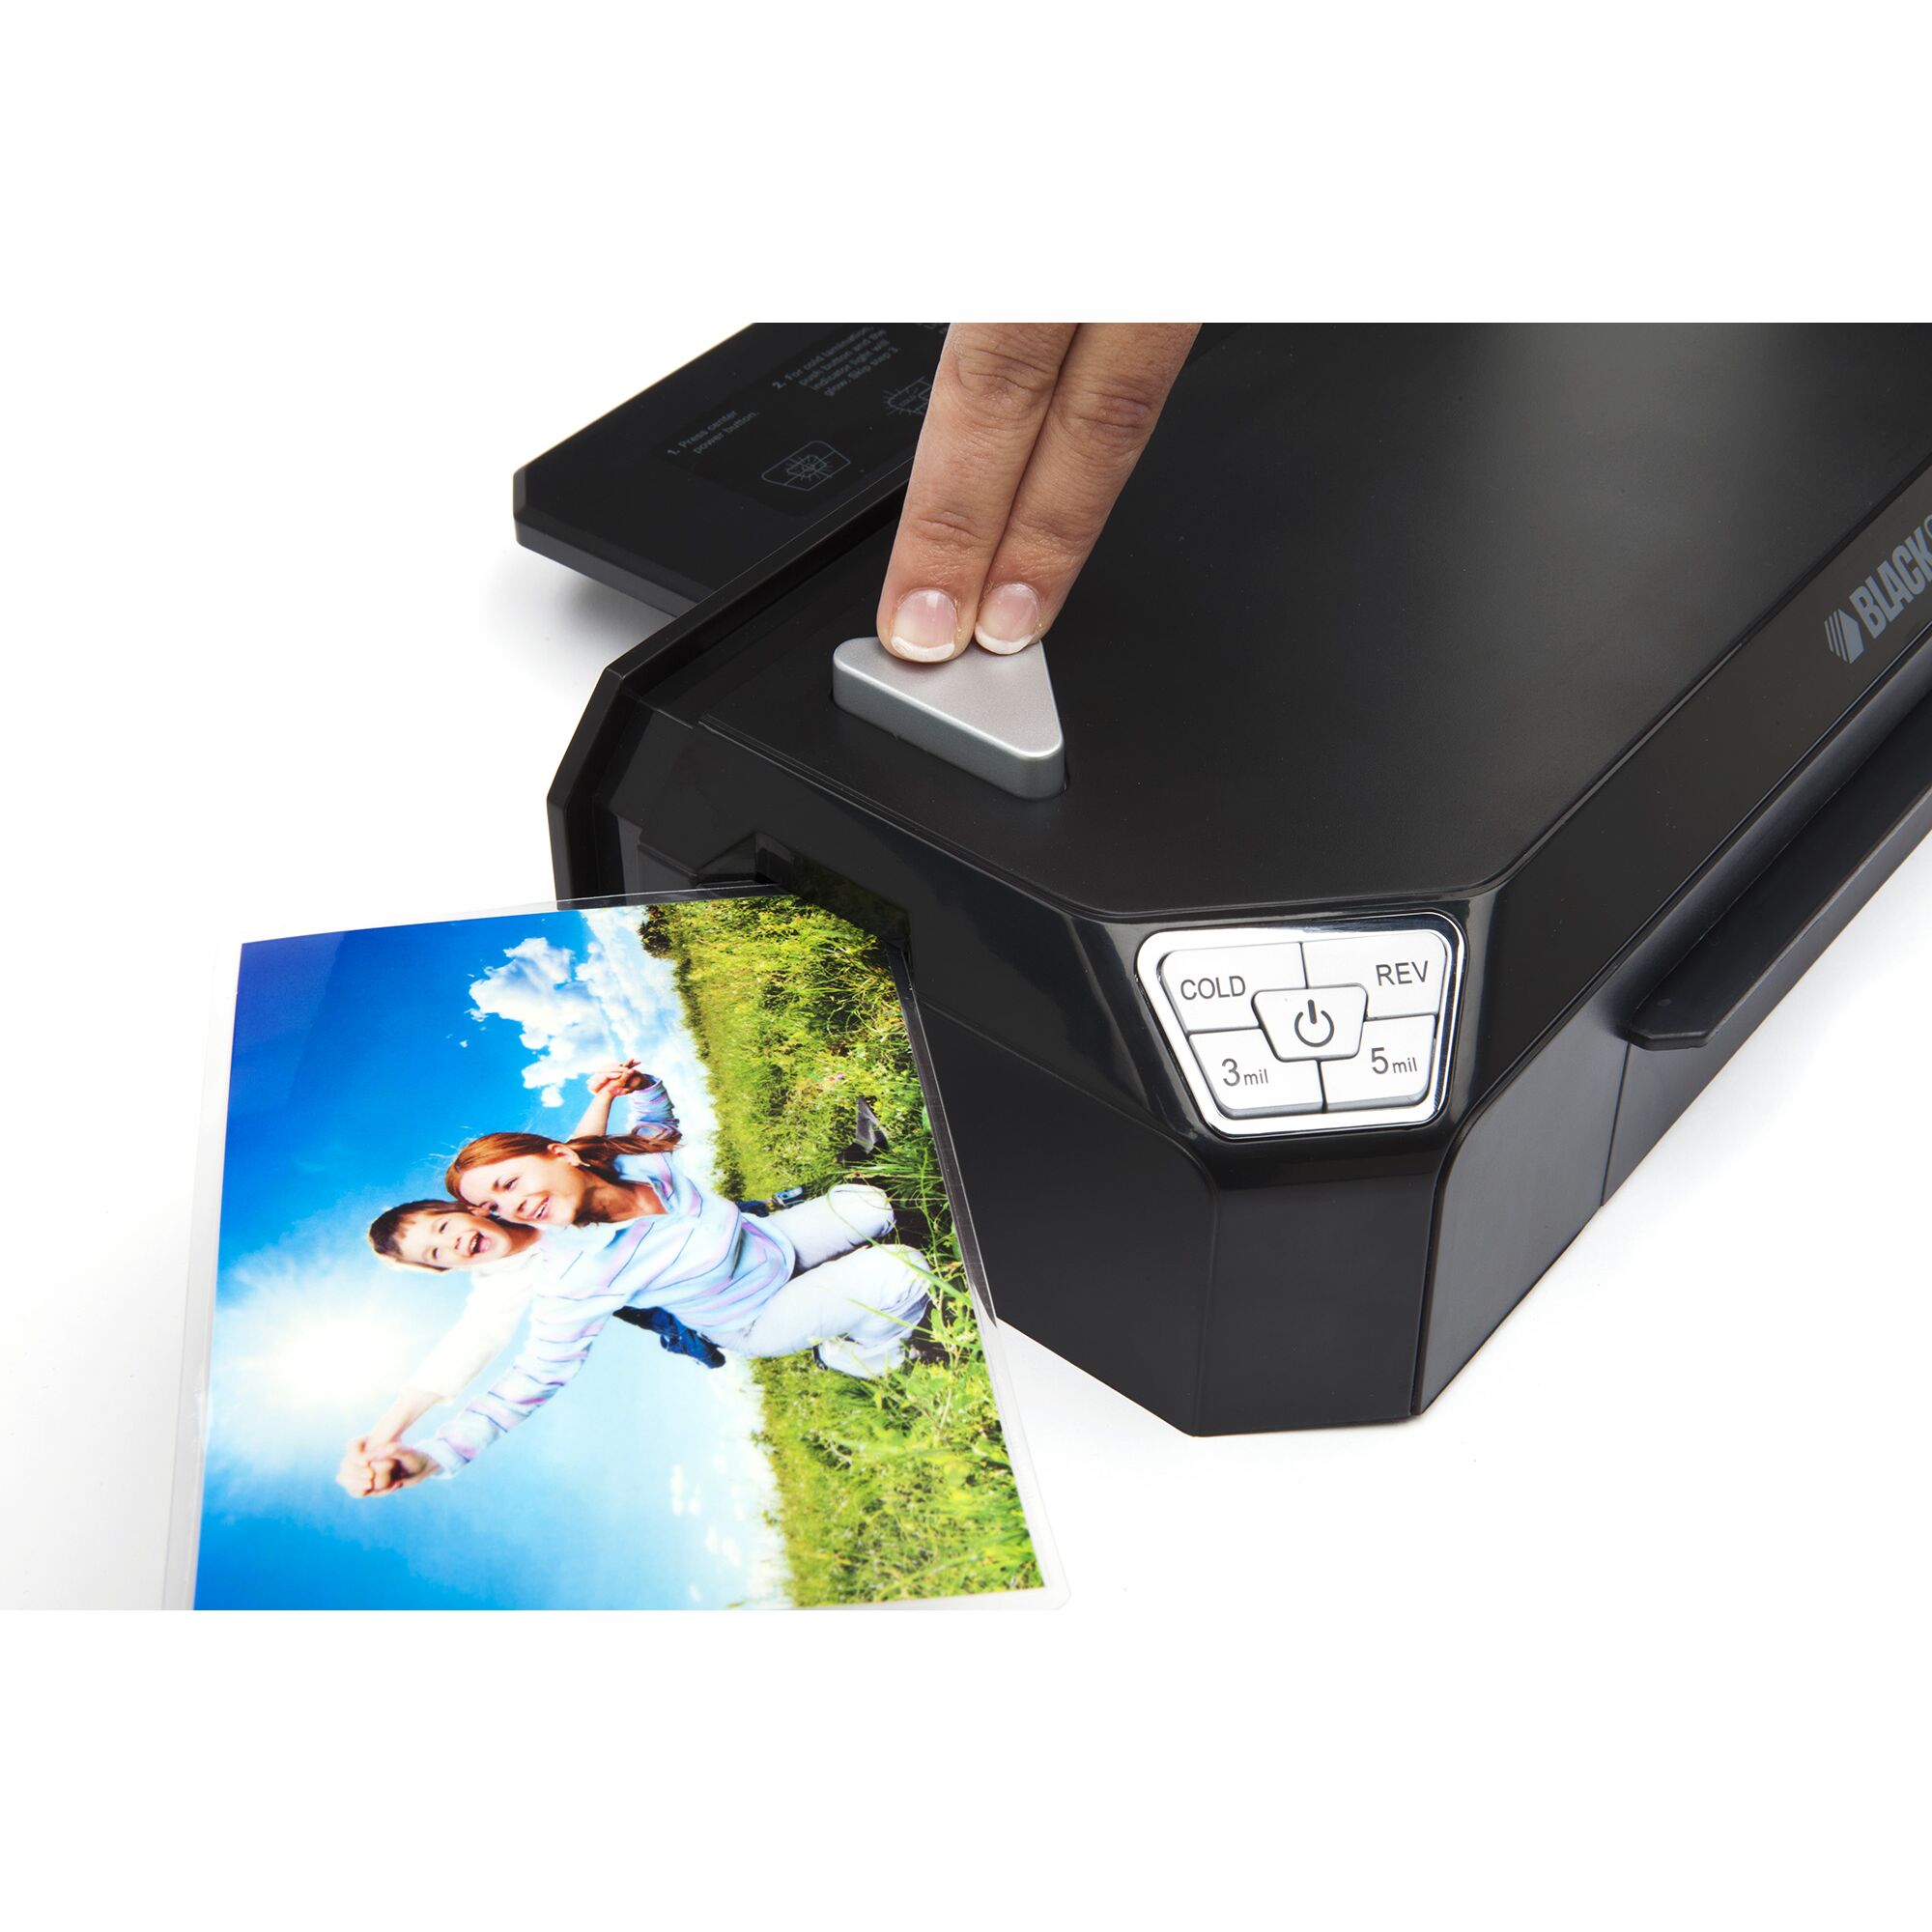 Flash T M Pro X L 12 and 5 tenths inch Thermal Laminator being used to laminate photo.